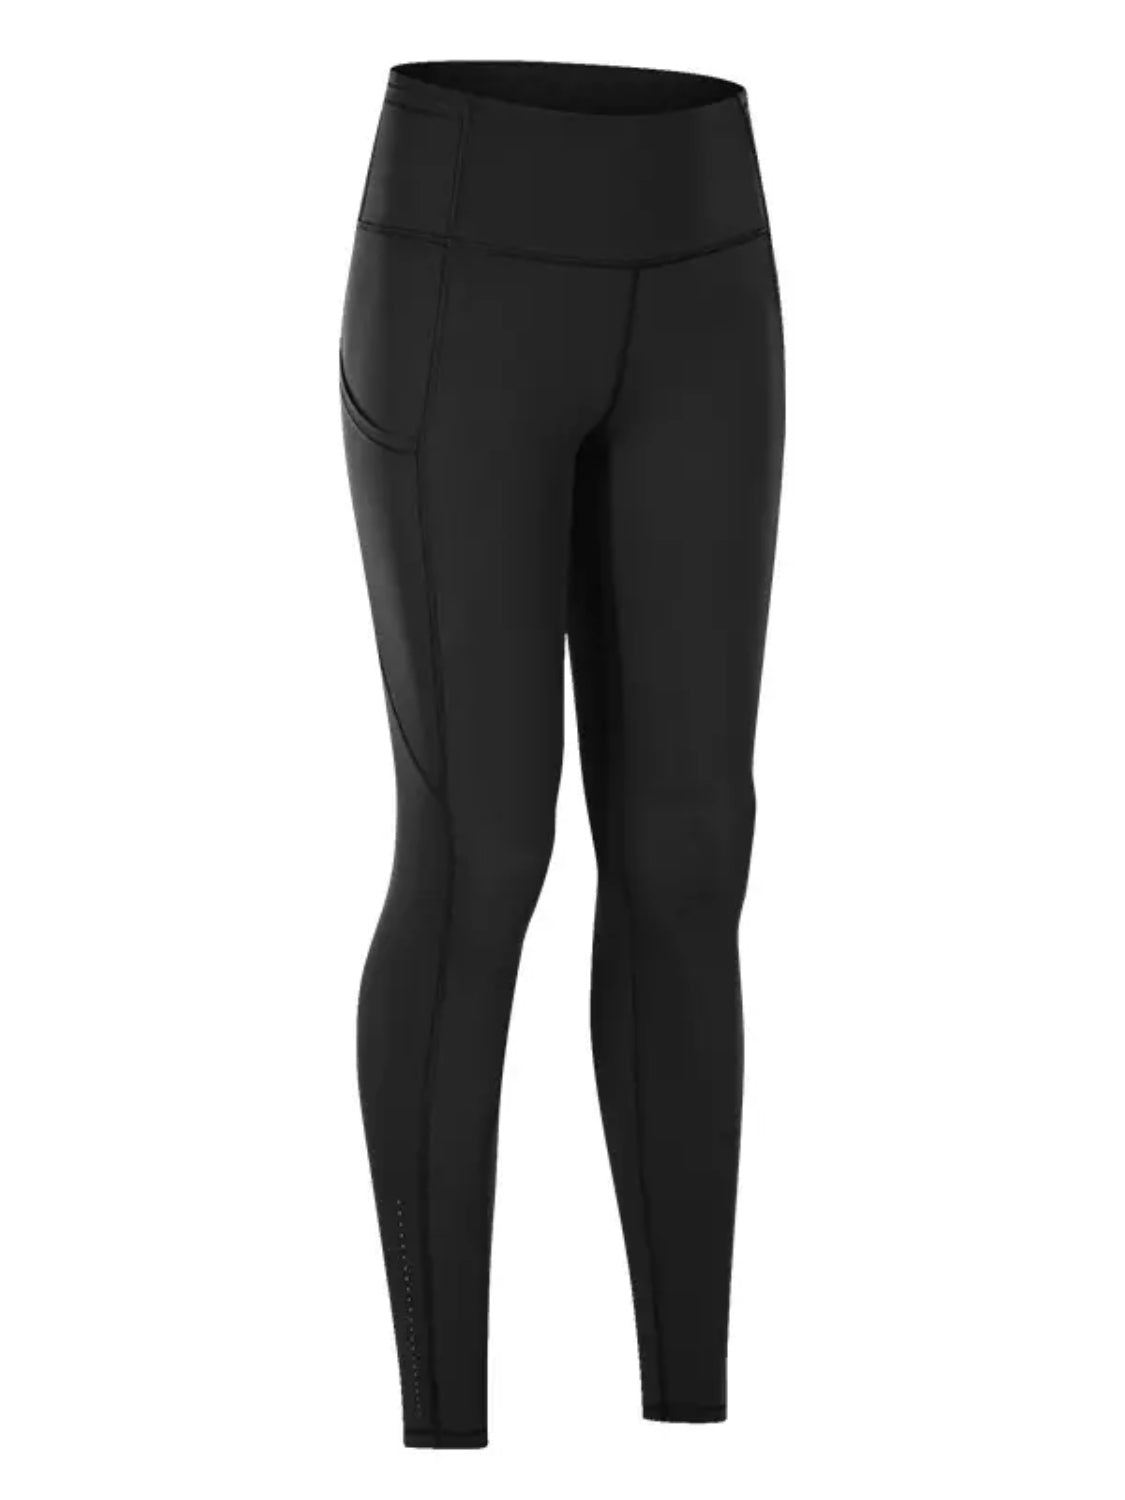 Wide Waistband Sports Leggings free shipping -Oh Em Gee Boutique